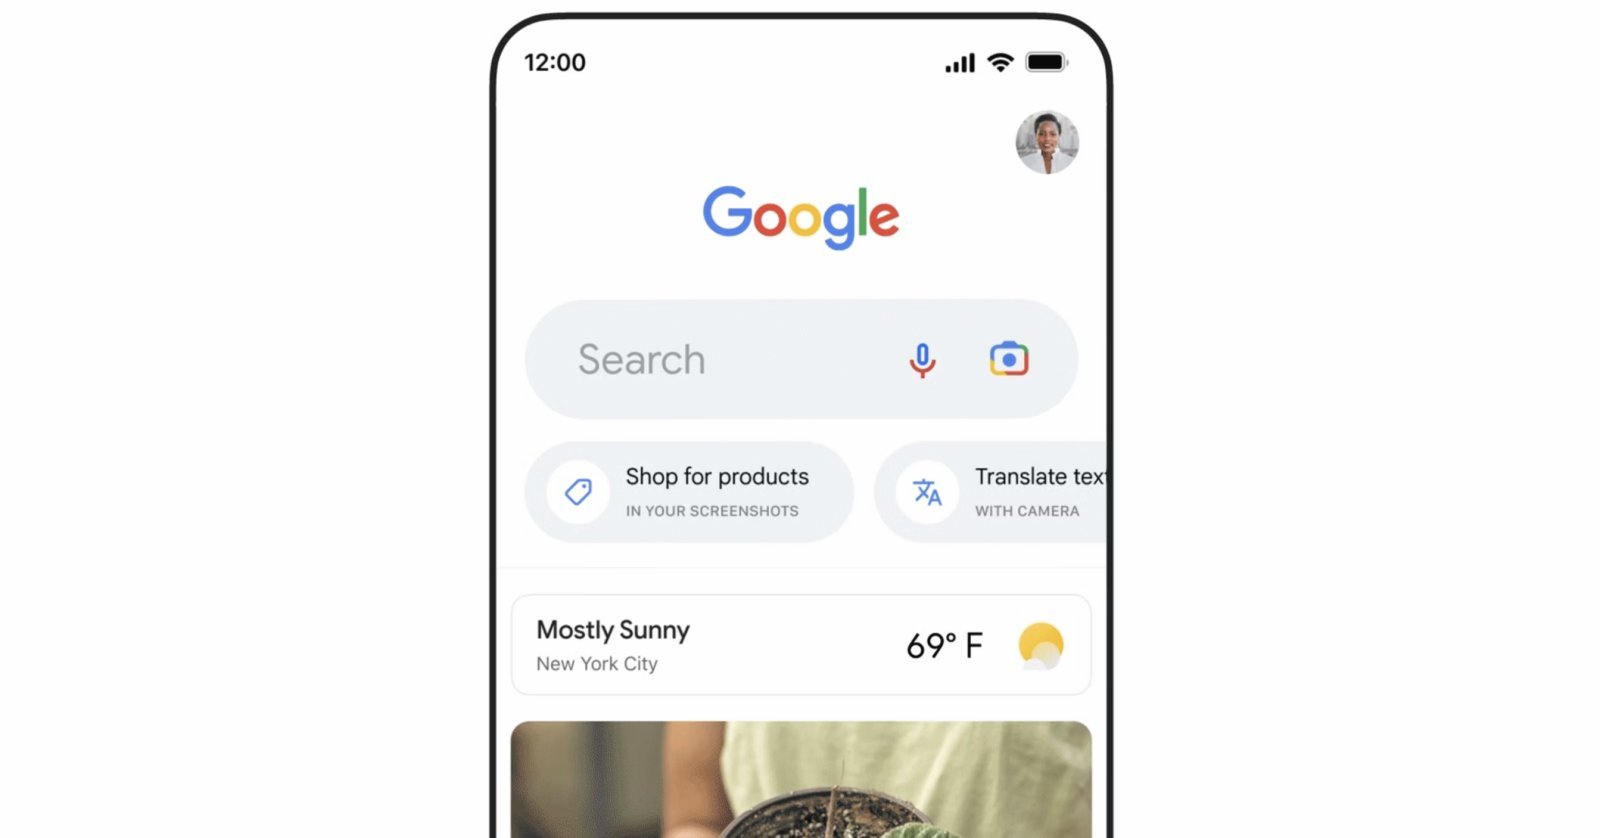 Search bar is going to be replaced in Google App, a new change is going to be introduced for Android users